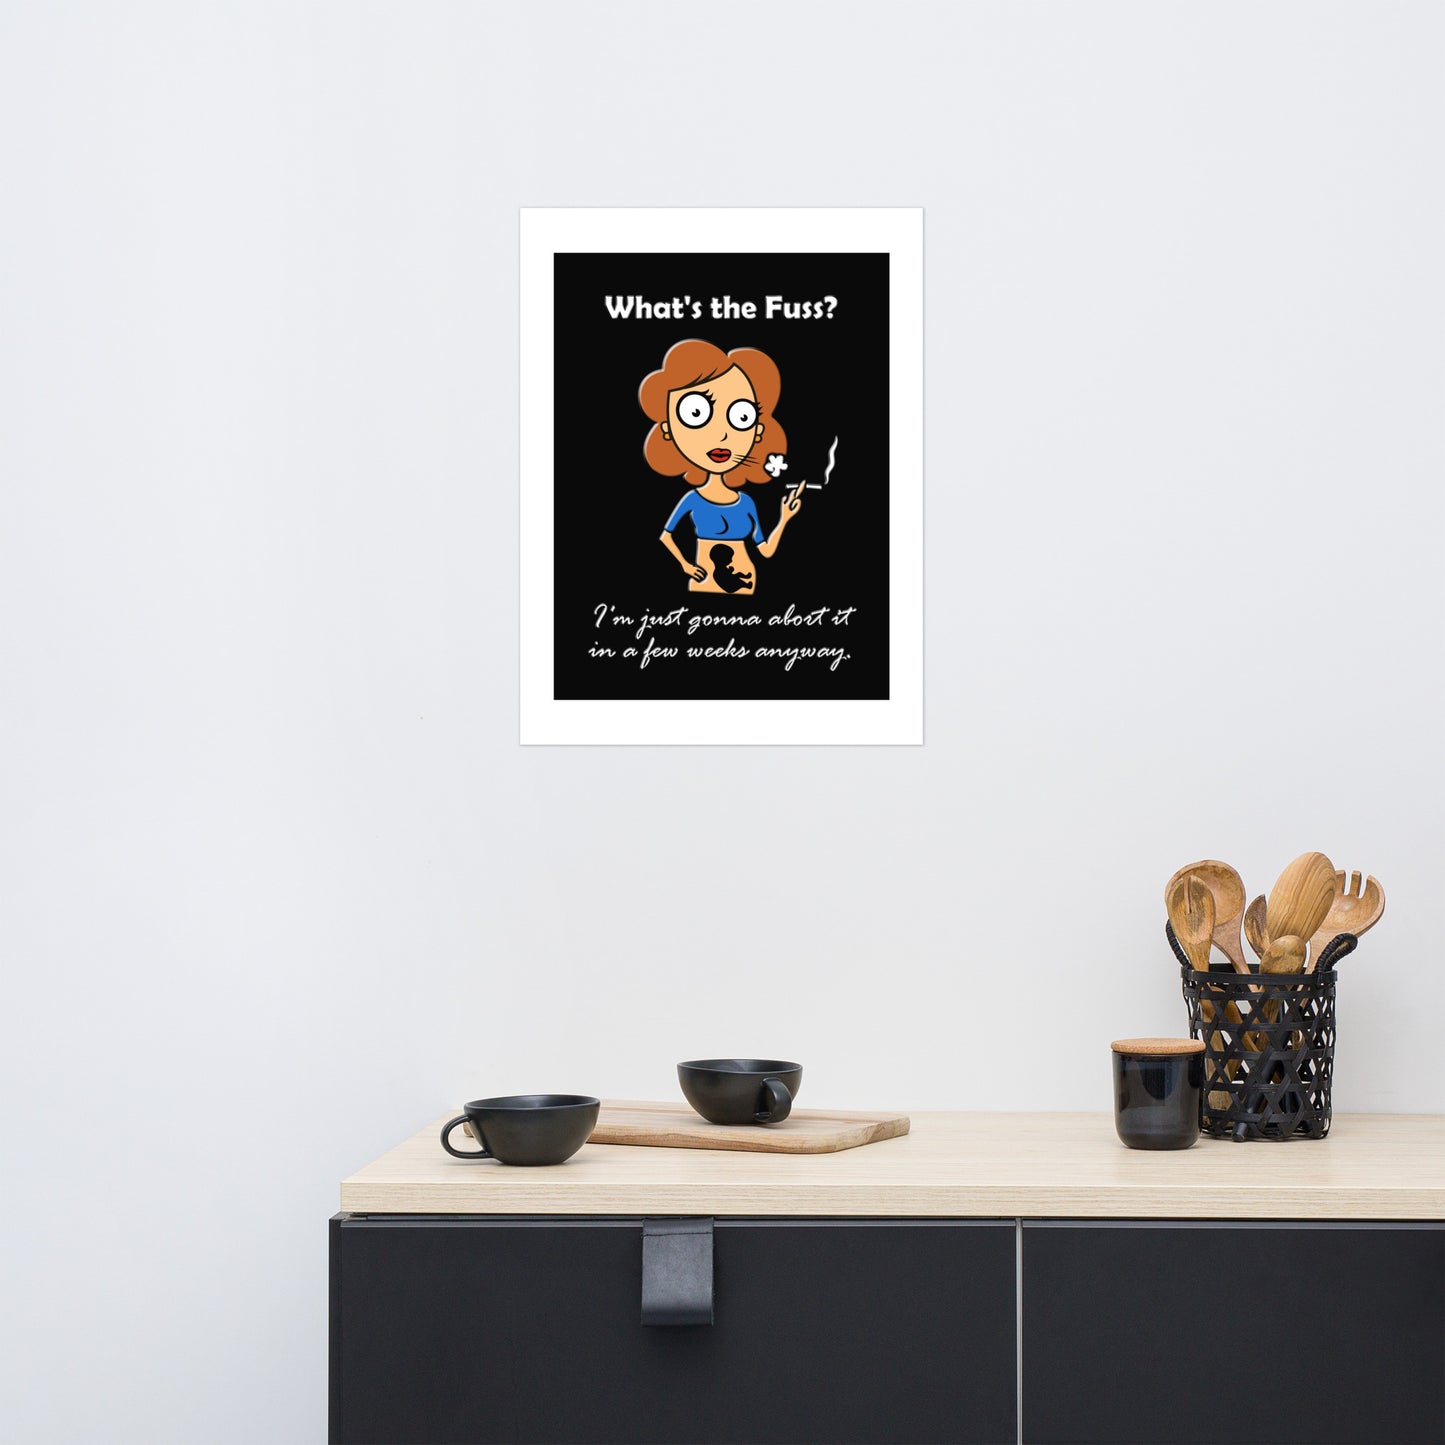 A015 Art Print - Museum Quality Giclée Print Featuring a Graphic of a Young Pregnant Woman Smoking, with the Text “What’s the Fuss? I’m Just Gonna Abort It in a Few Weeks Anyway.”